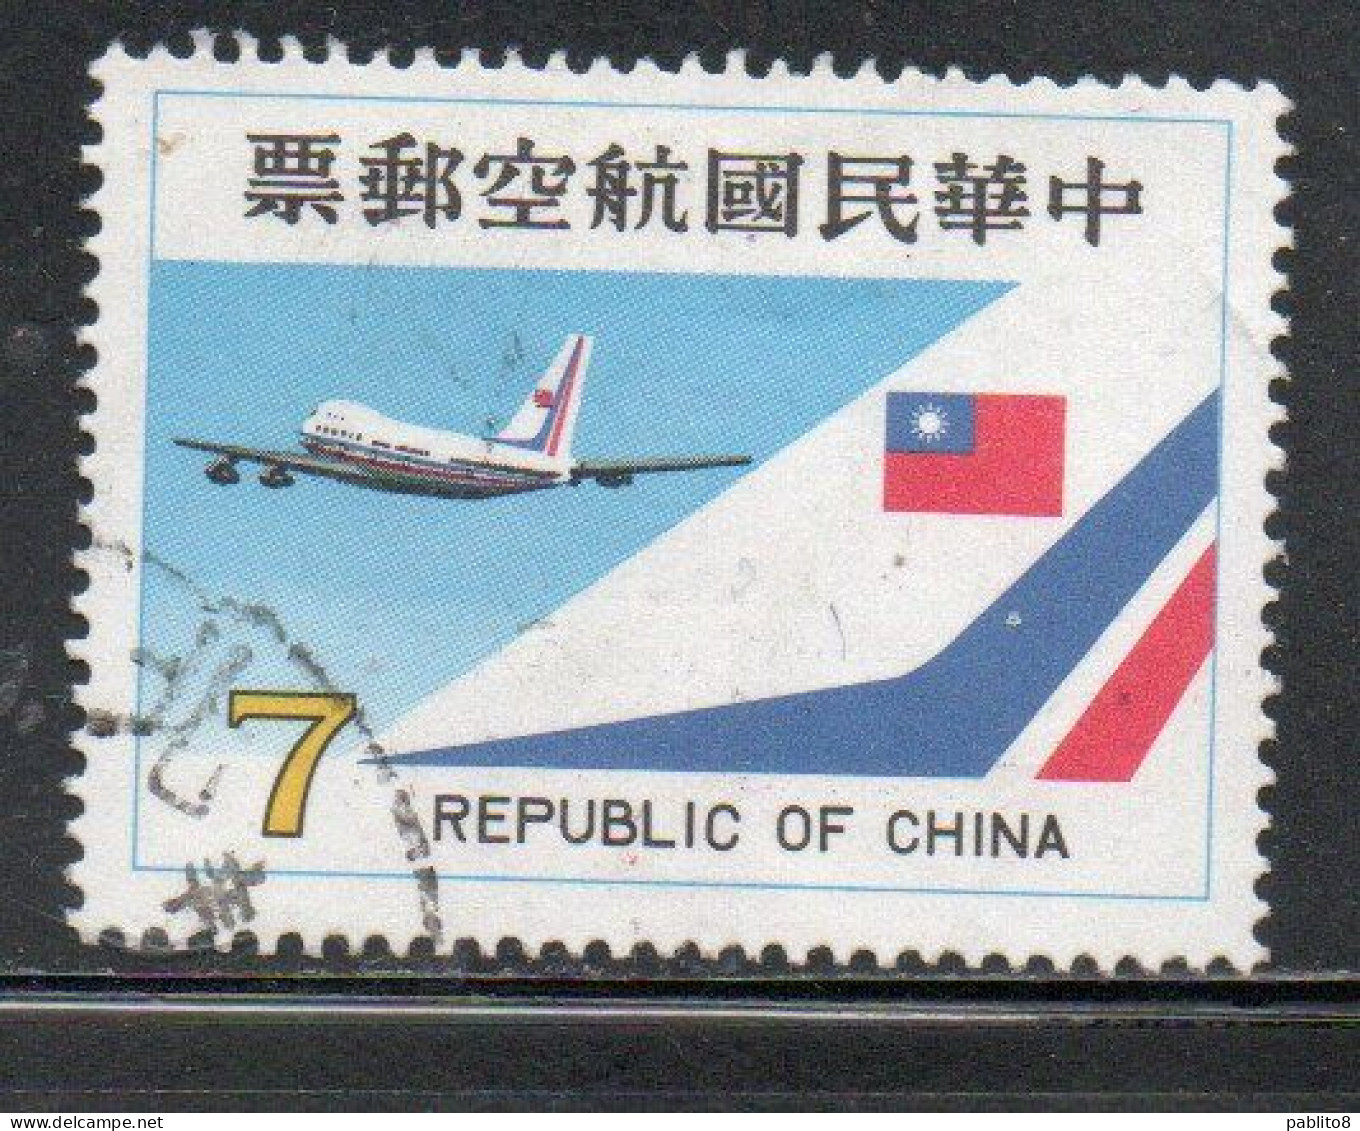 CHINA REPUBLIC CINA TAIWAN FORMOSA 1980 AIR POST MAIL AIRMAIL CHINA AIRLINES JET 7$ USED USATO OBLITERE' - Luchtpost